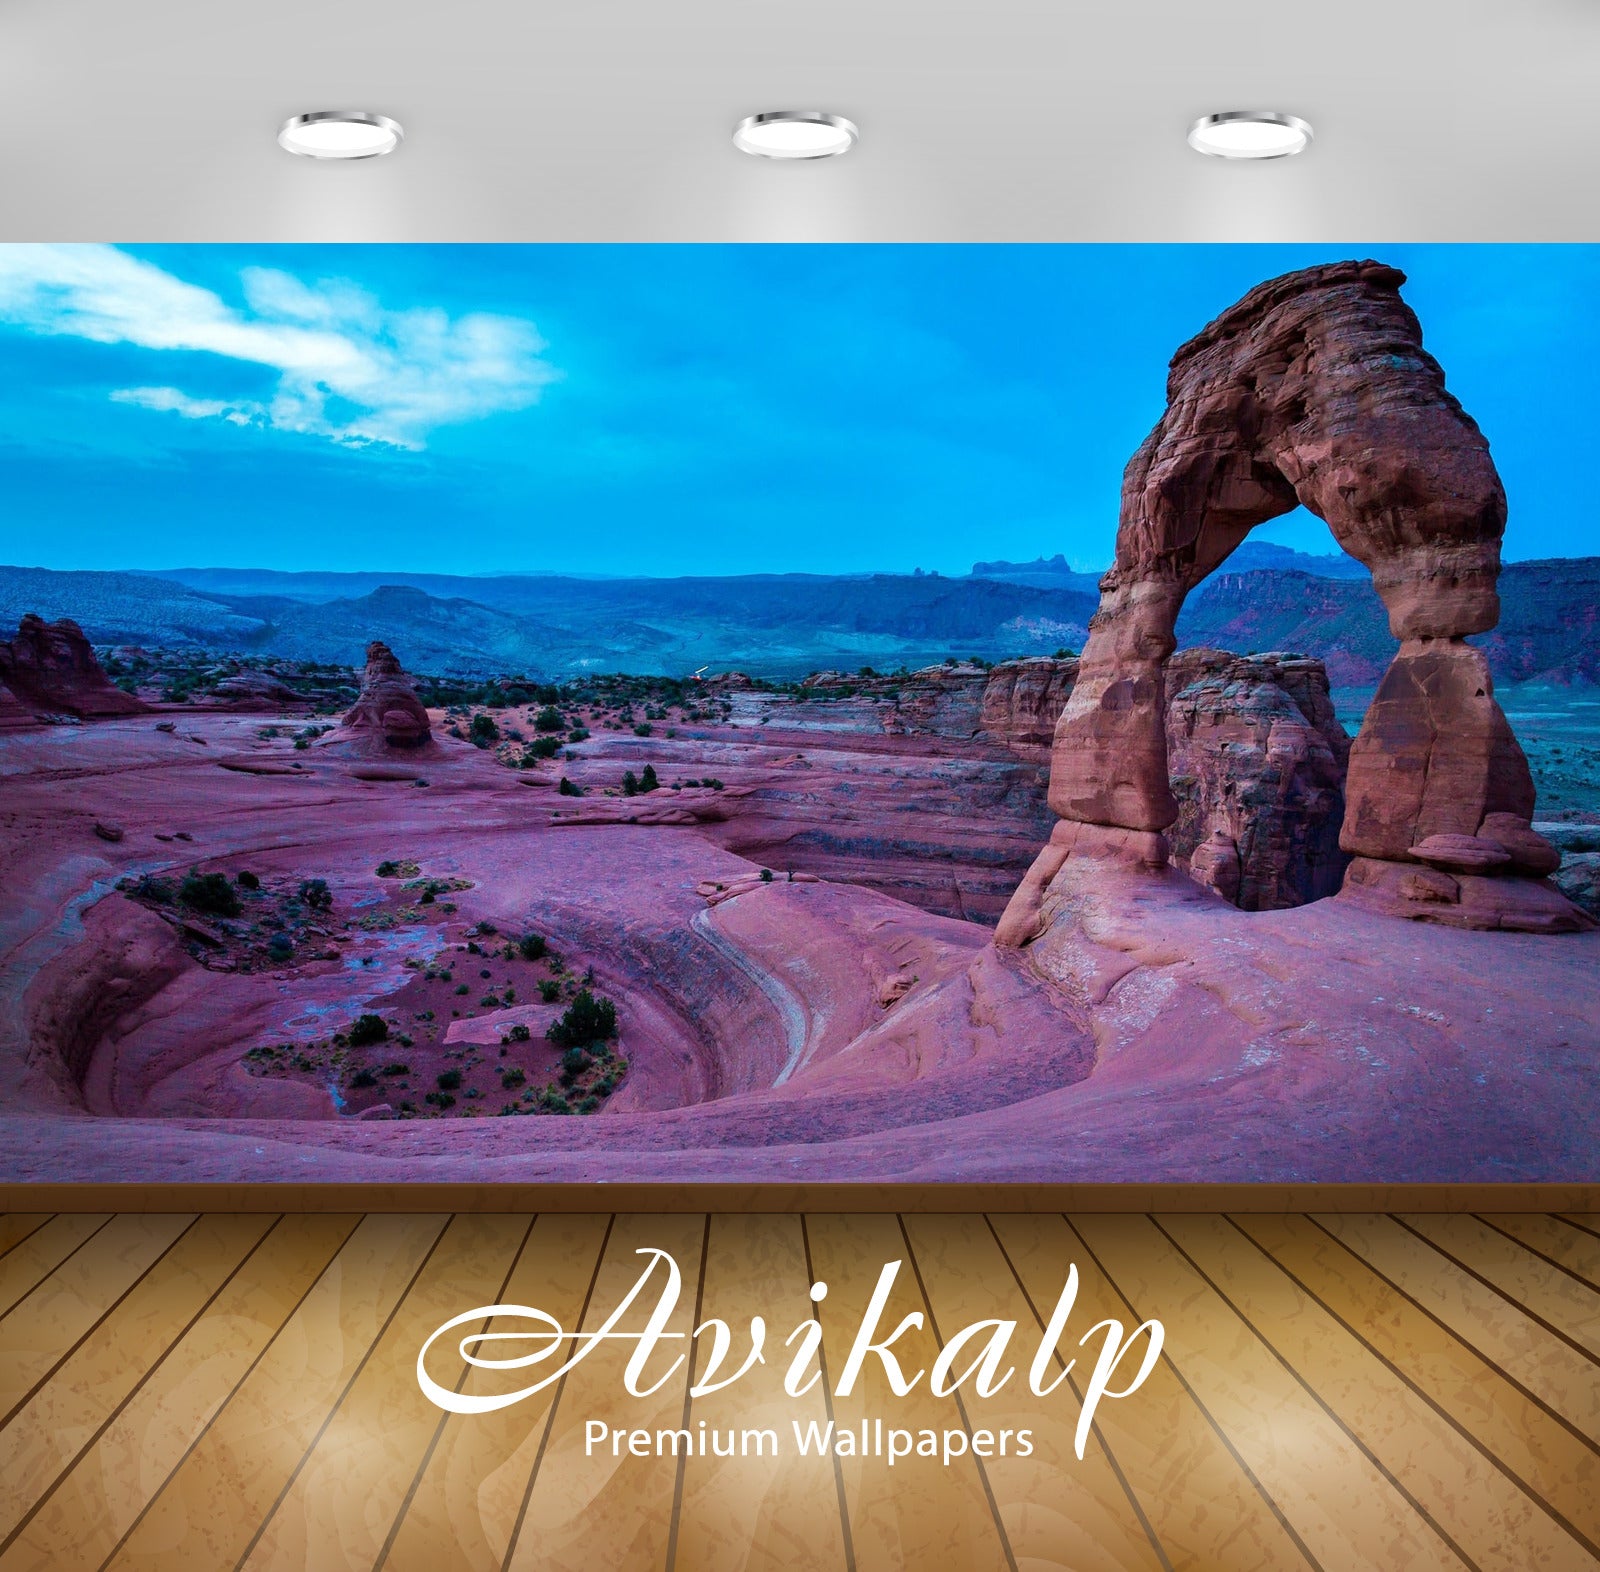 Avikalp Exclusive Awi5380 Delicate Arch Nature Full HD Wallpapers for Living room, Hall, Kids Room,